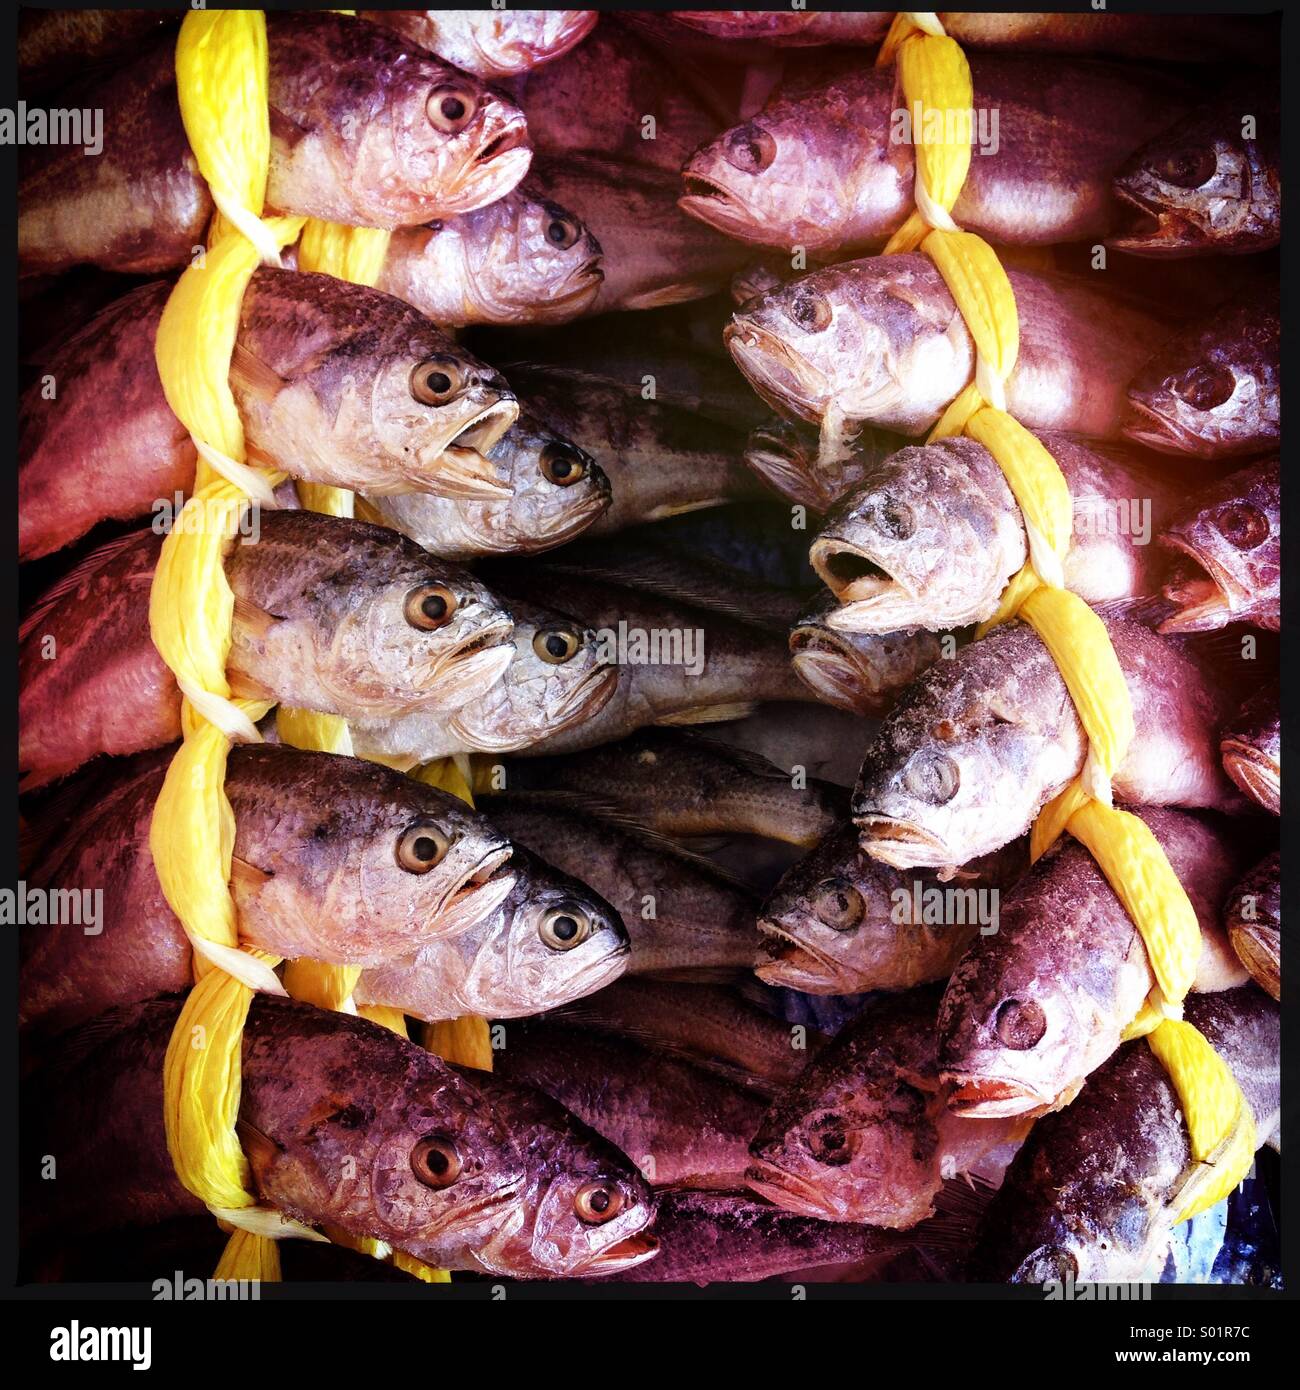 Dried fishes tied up Stock Photo